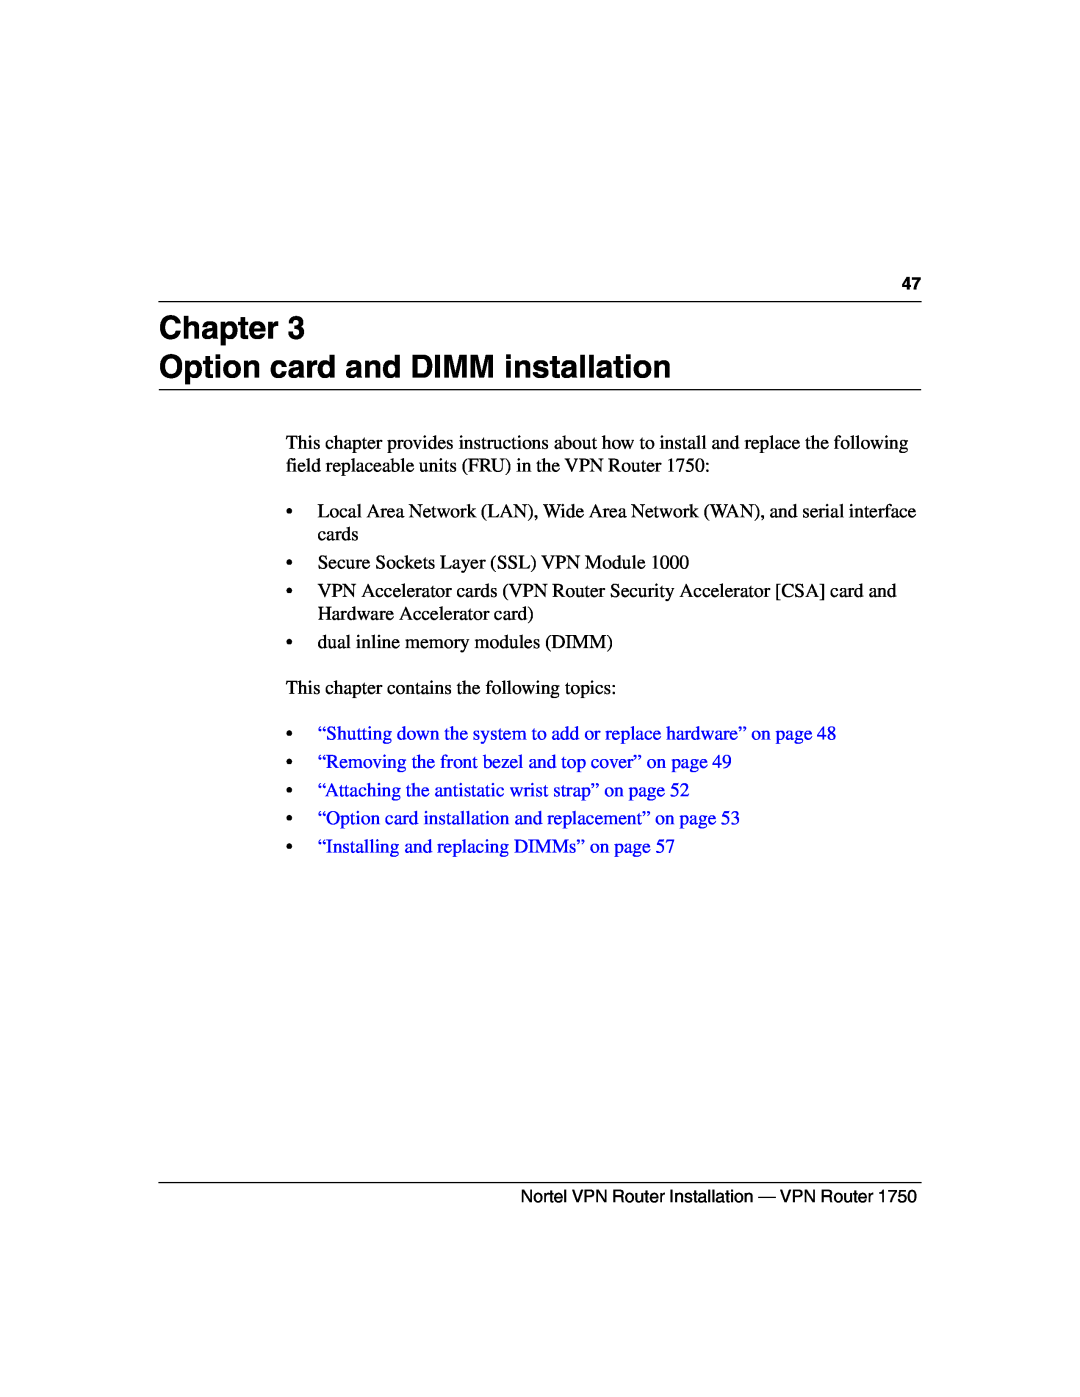 Nortel Networks 1750 manual Chapter Option card and DIMM installation, “Removing the front bezel and top cover” on page 